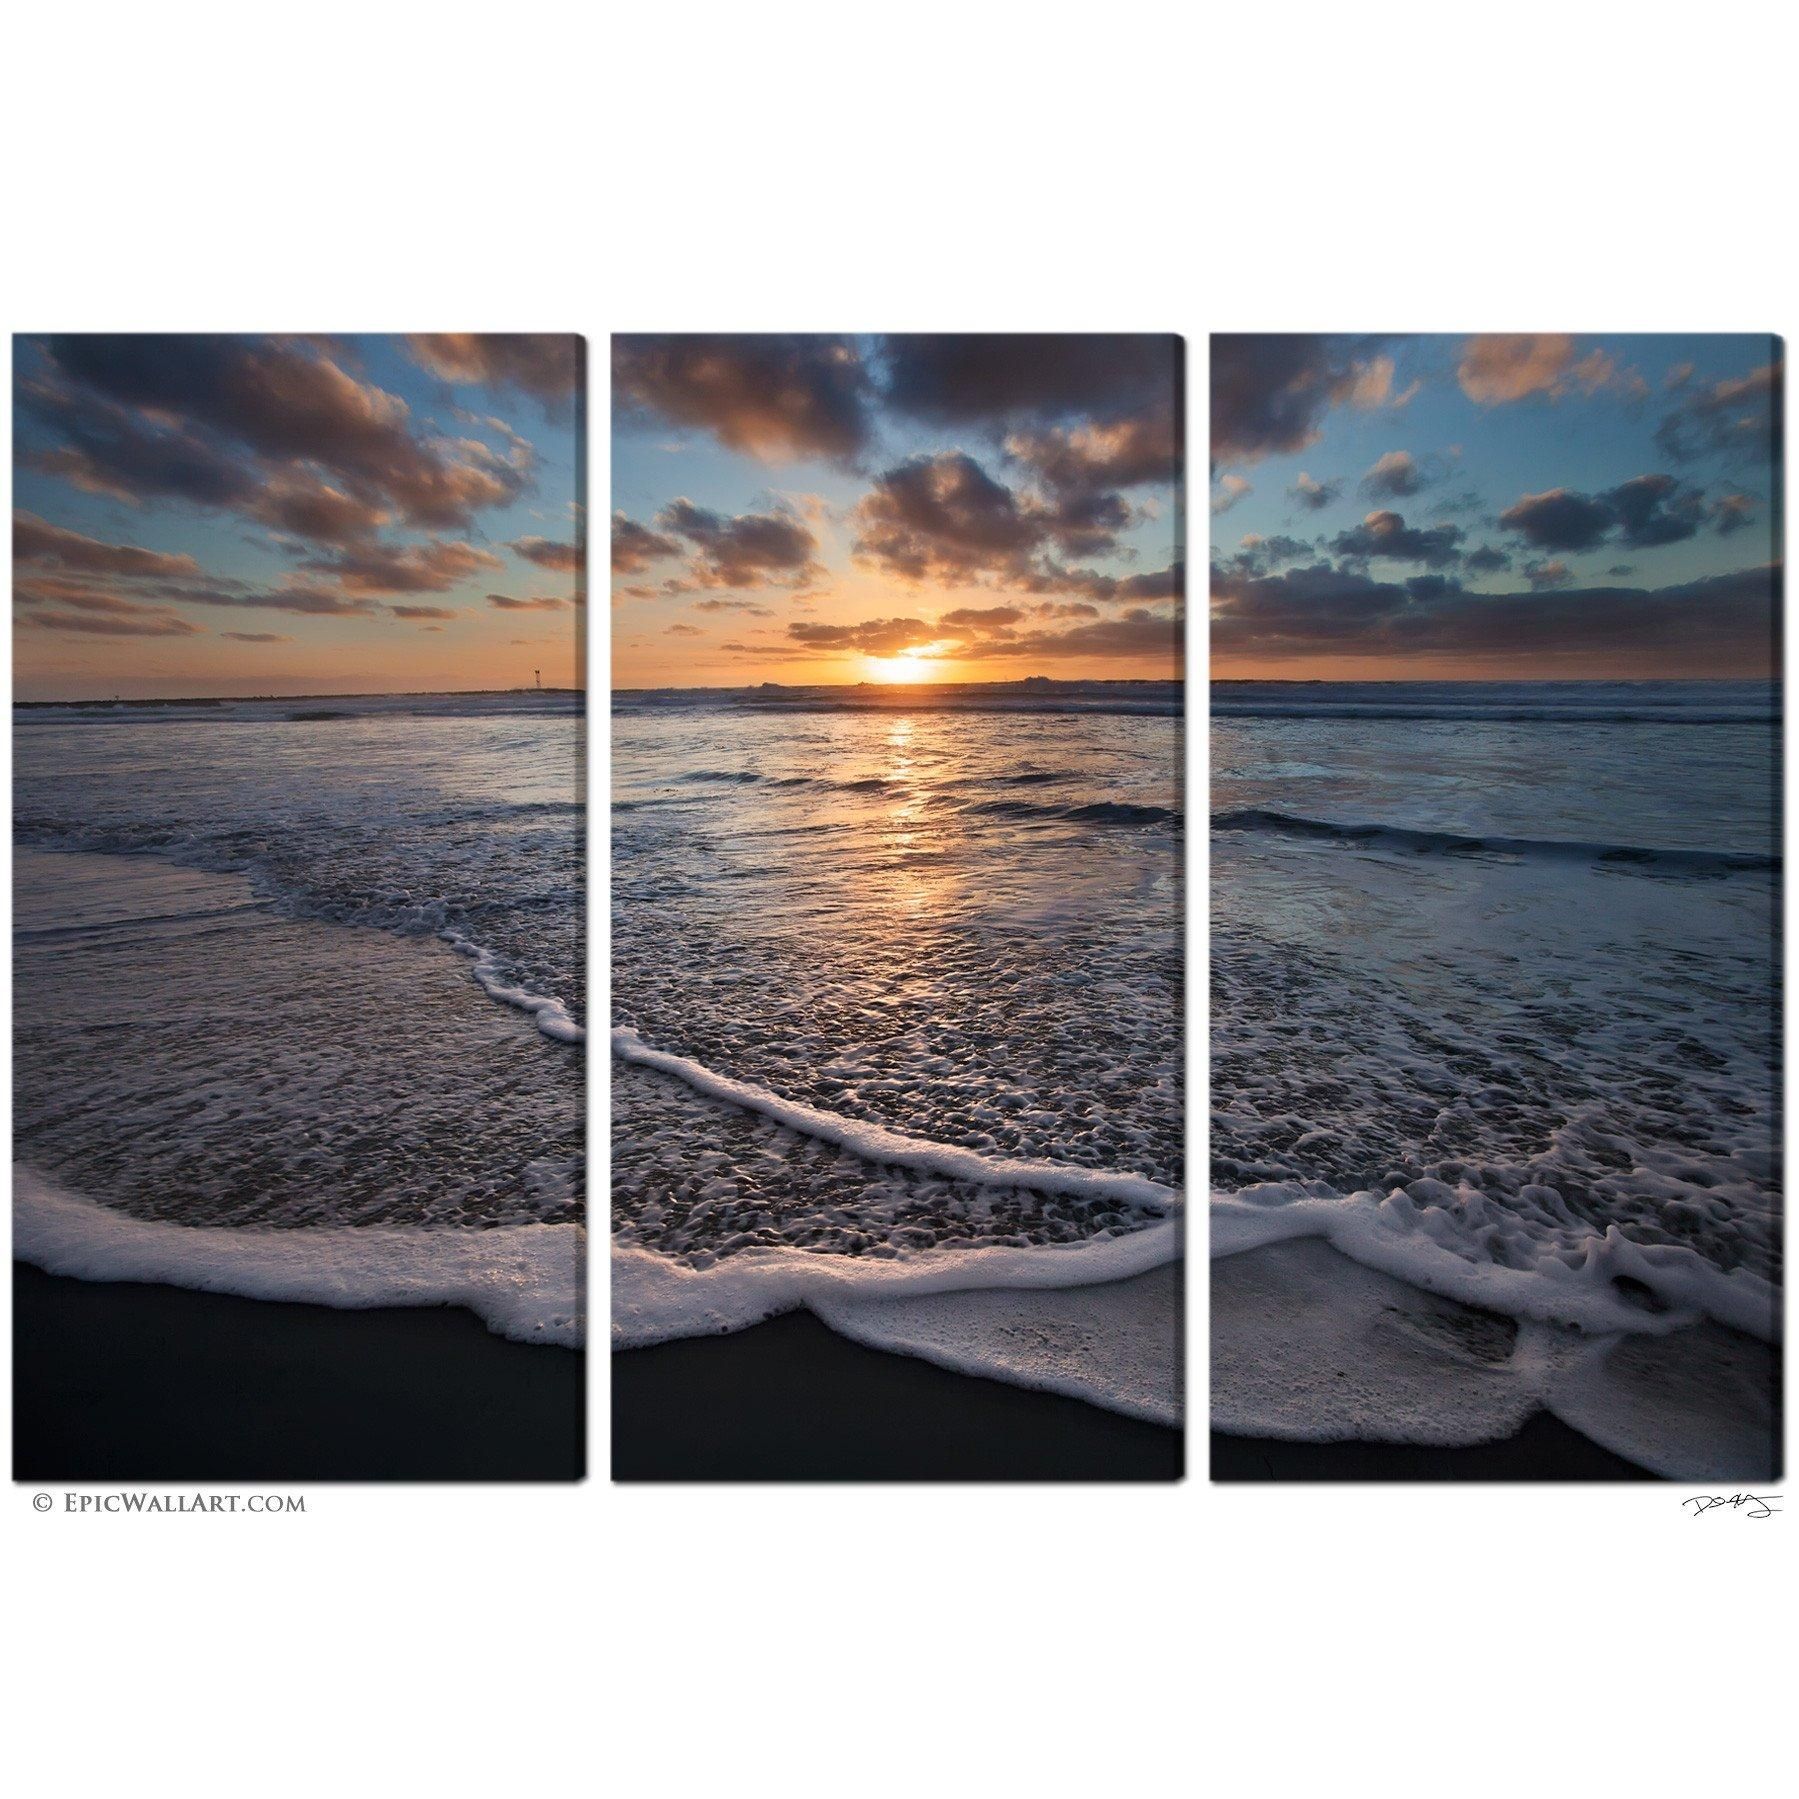 Wall Art Three Piece Set – Shenra For Three Piece Wall Art Sets (View 15 of 20)